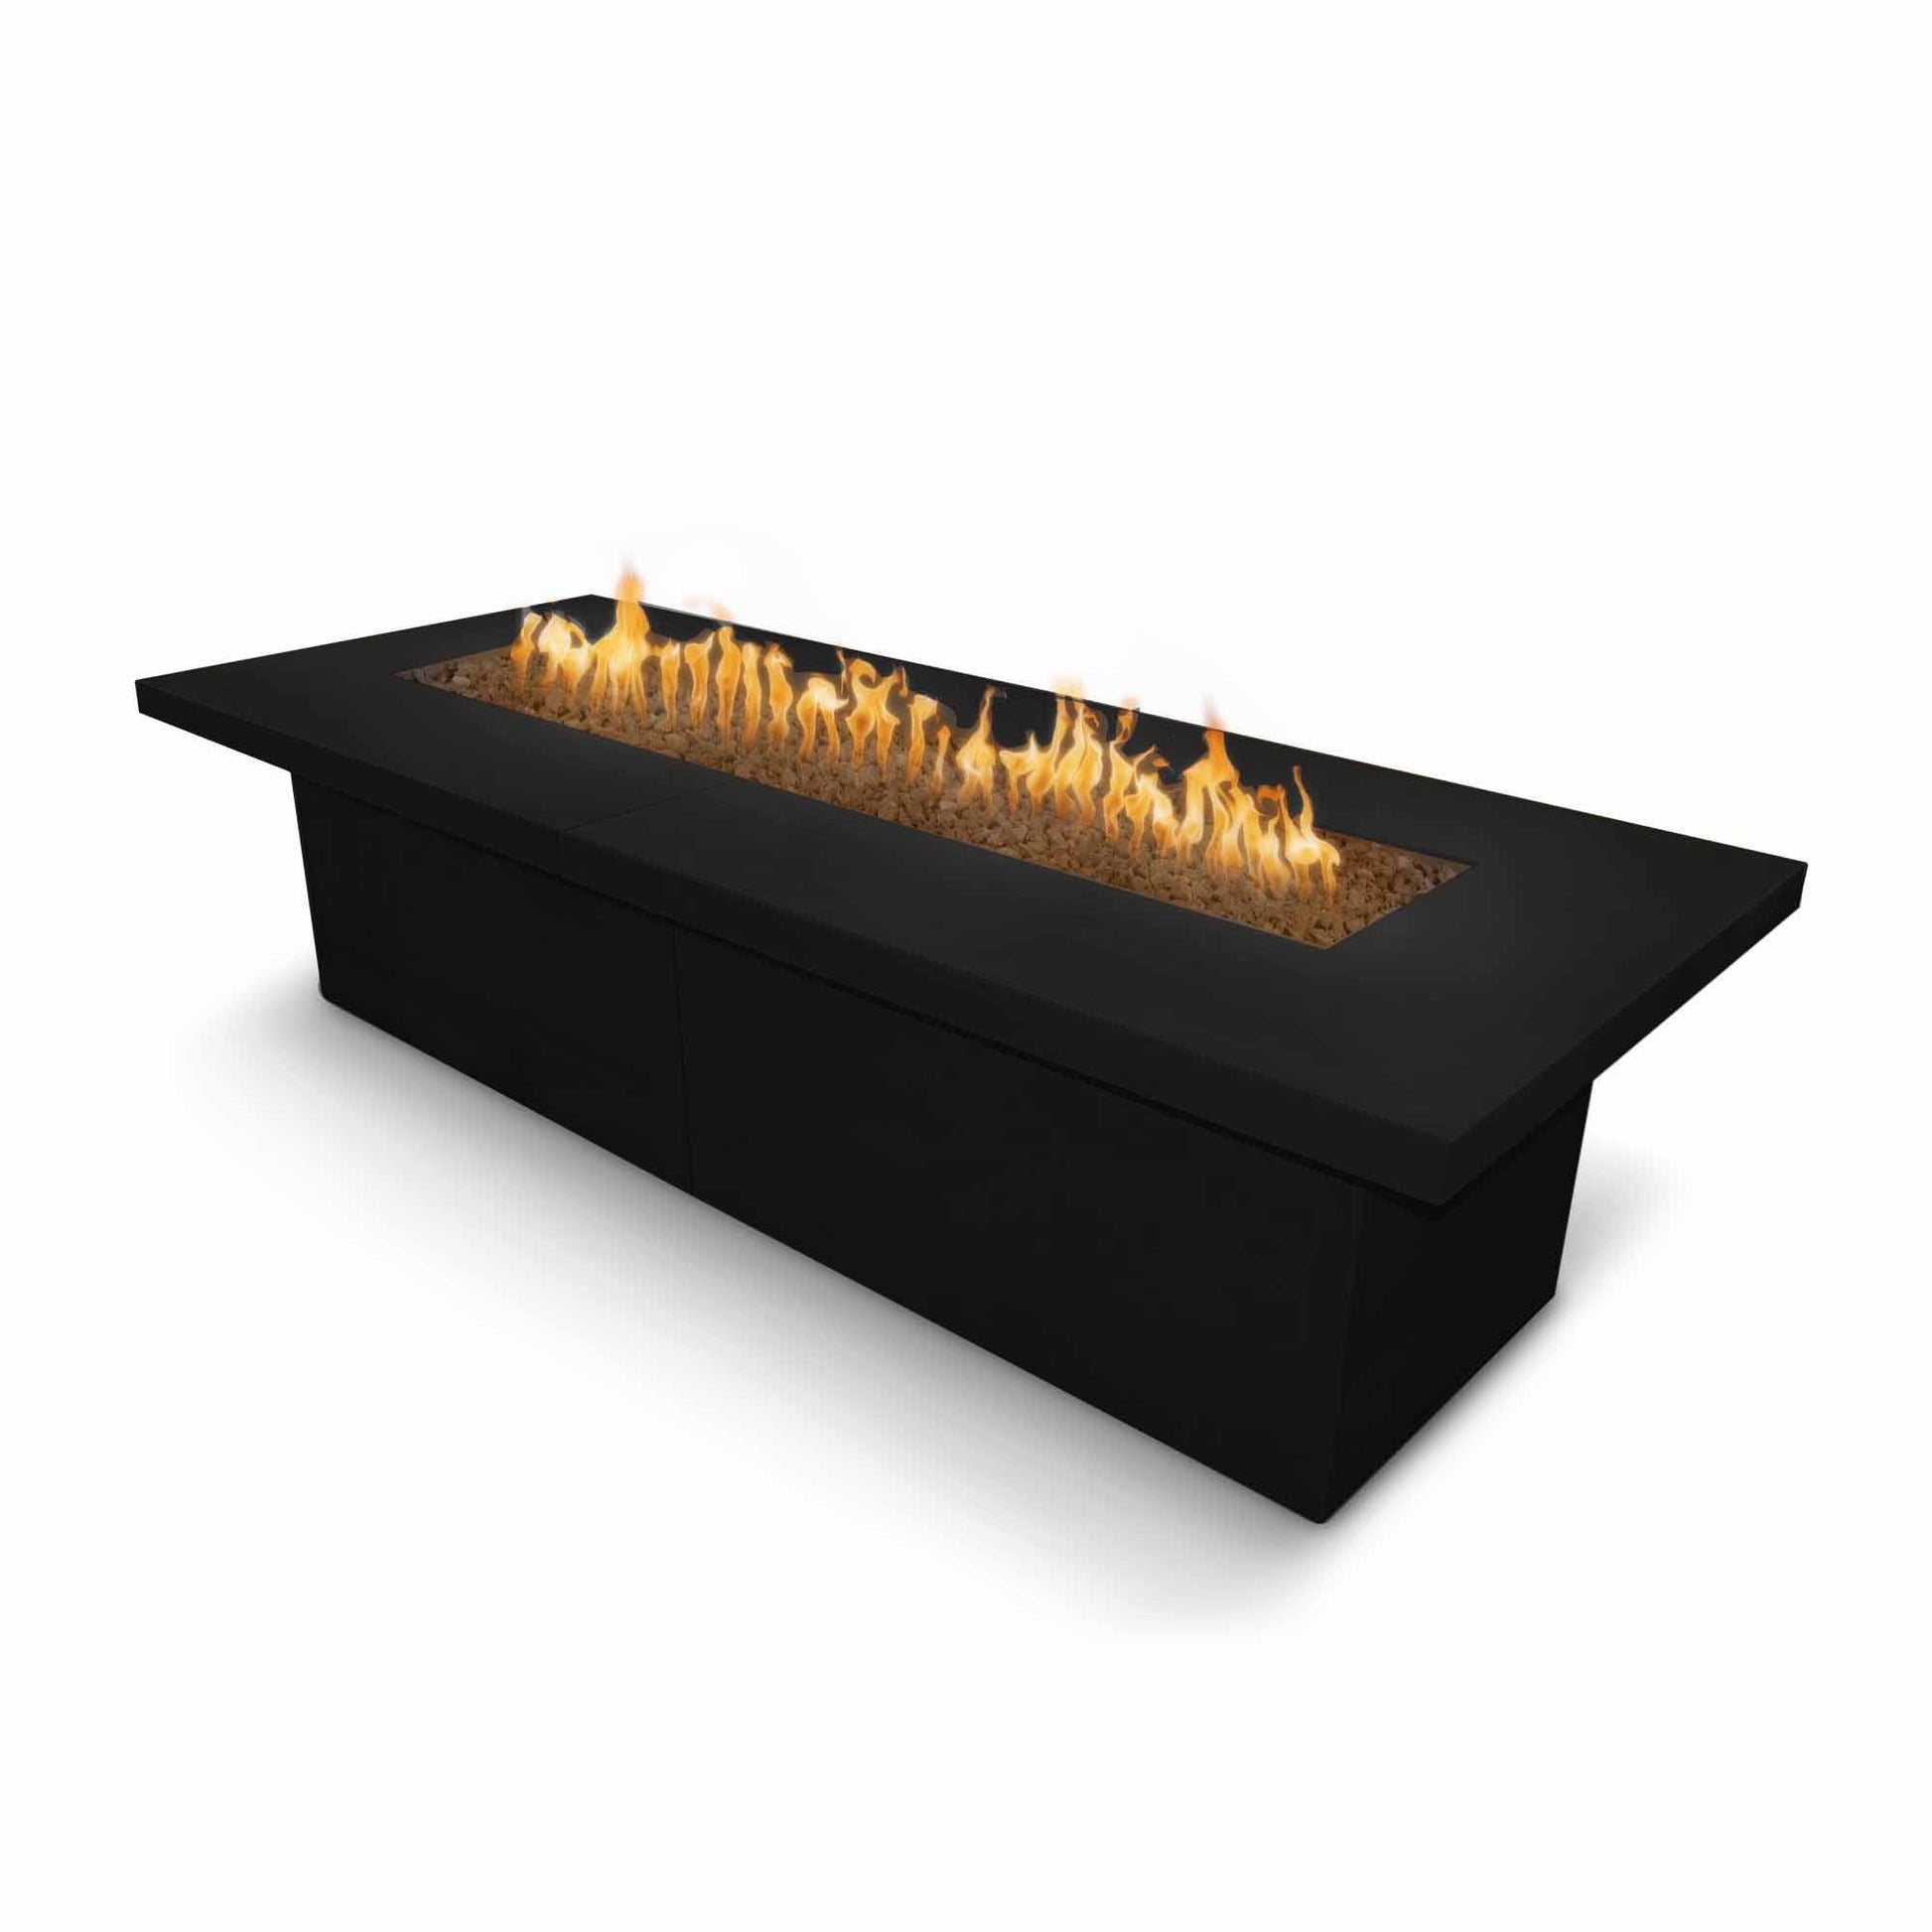 The Outdoor Plus Rectangular Newport 120" Hammered Copper Liquid Propane Fire Pit with Flame Sense with Spark Ignition